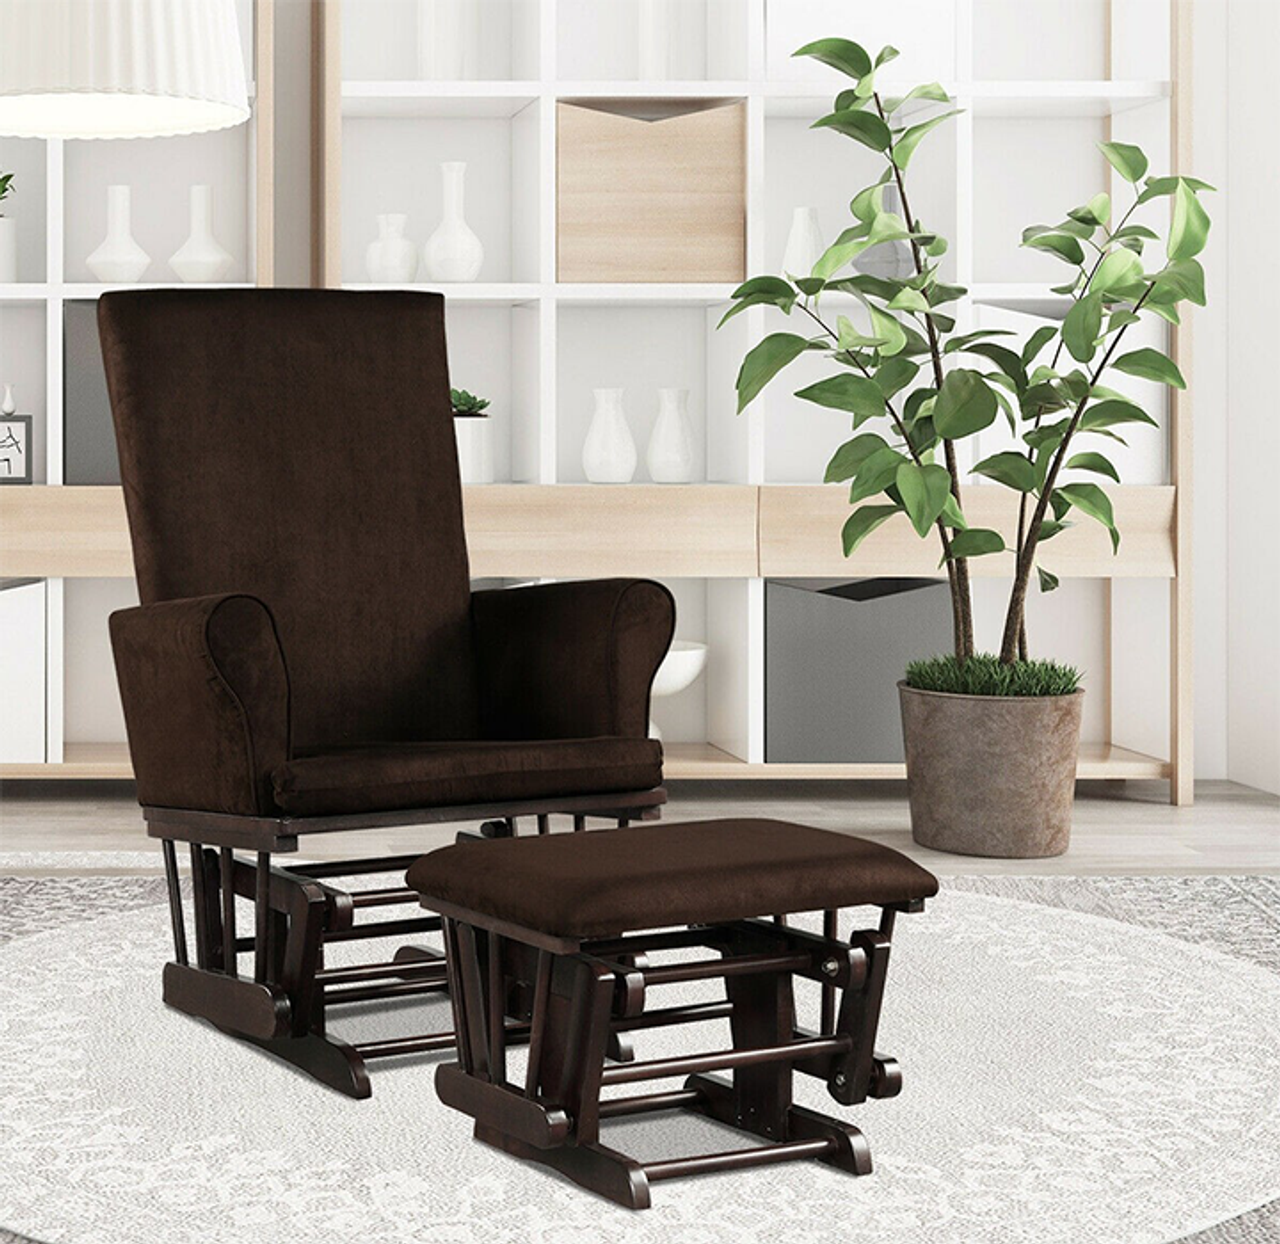 Wood Frame Cushioned Rocking Chair Glider & Ottoman Set product image